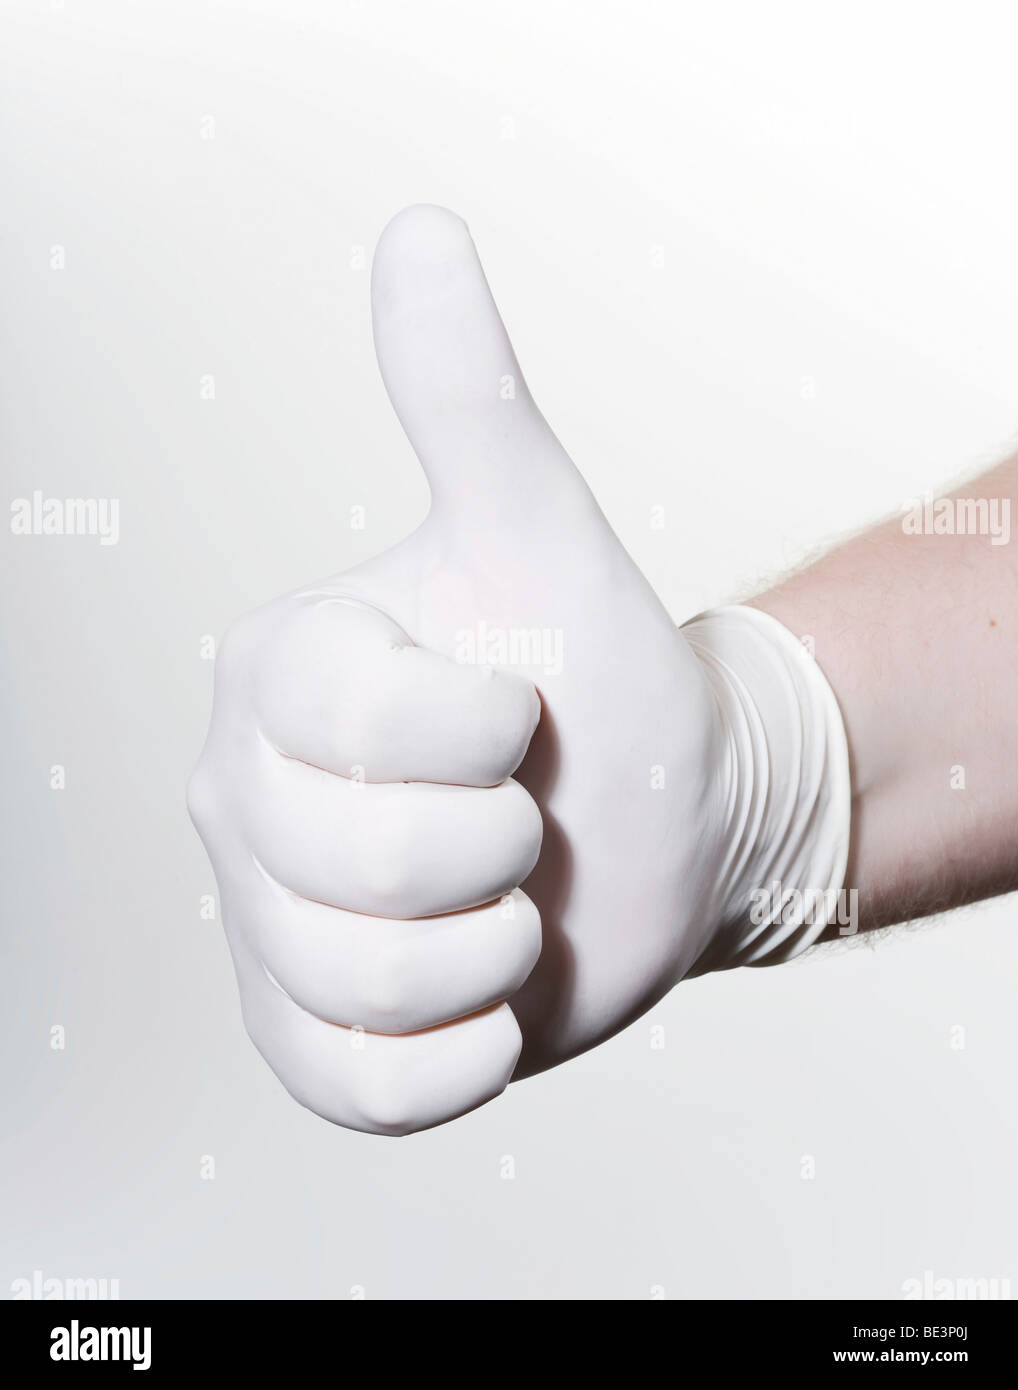 Thumbs up, latex gloves, medical Stock Photo